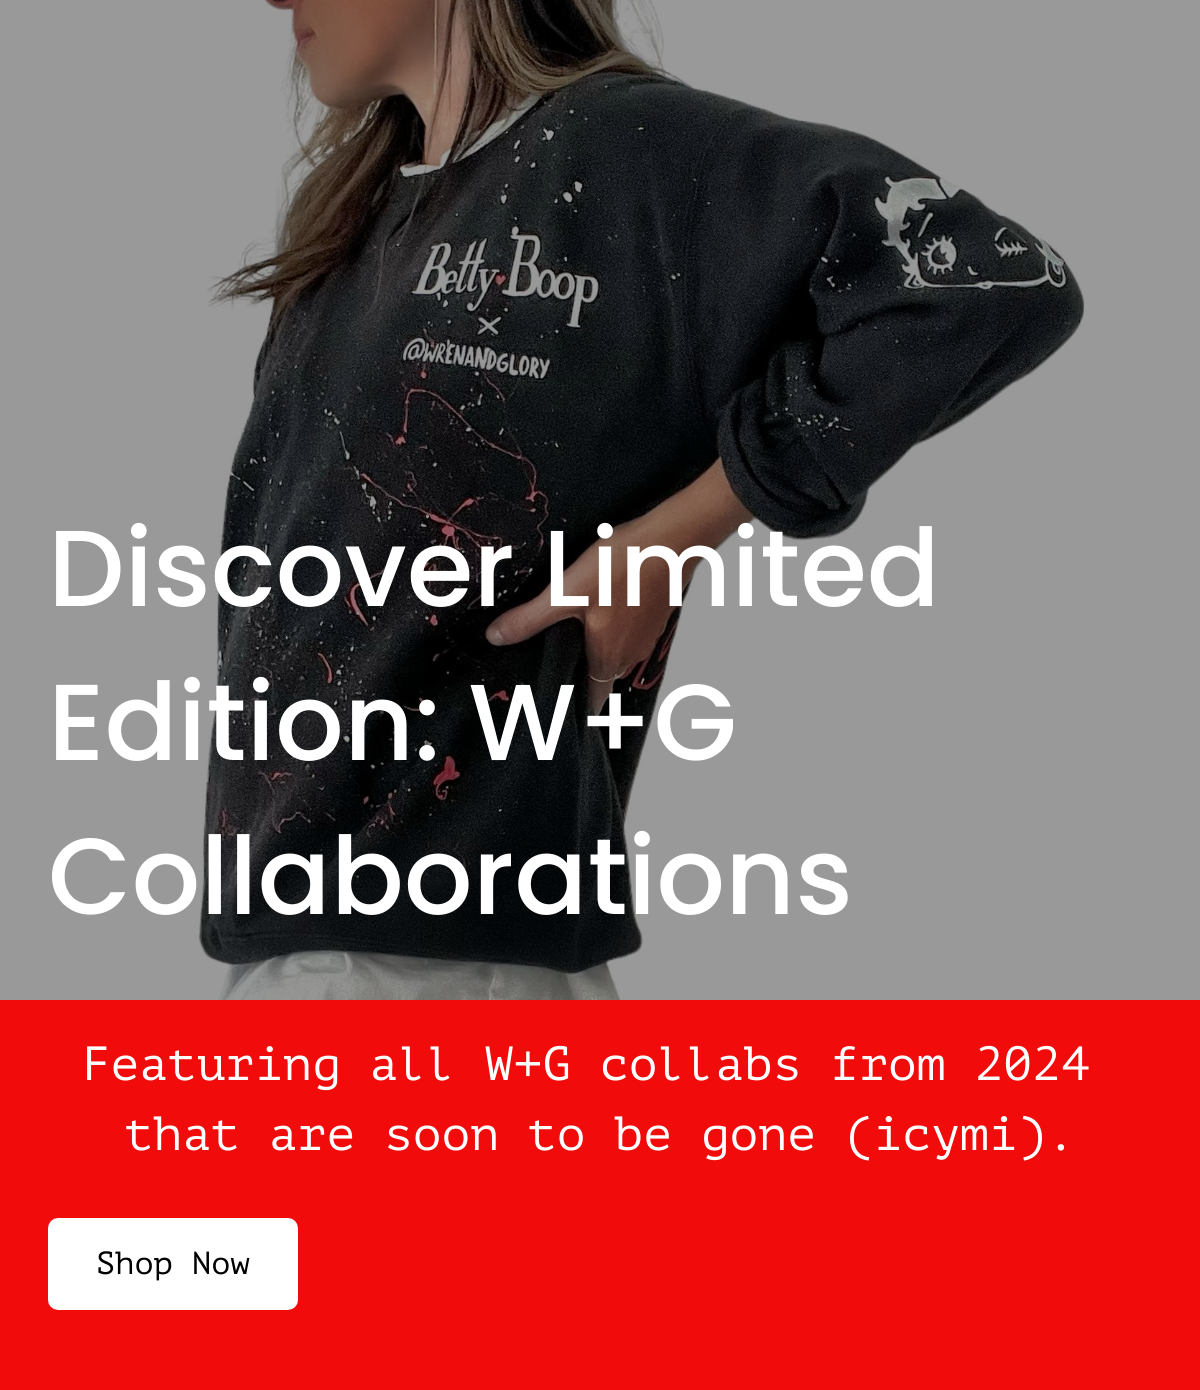  Discover Limited Edition: W+G Collaborations Featuring all W+G collabs from 2024 that are soon to be gone (icymi). Shop Now